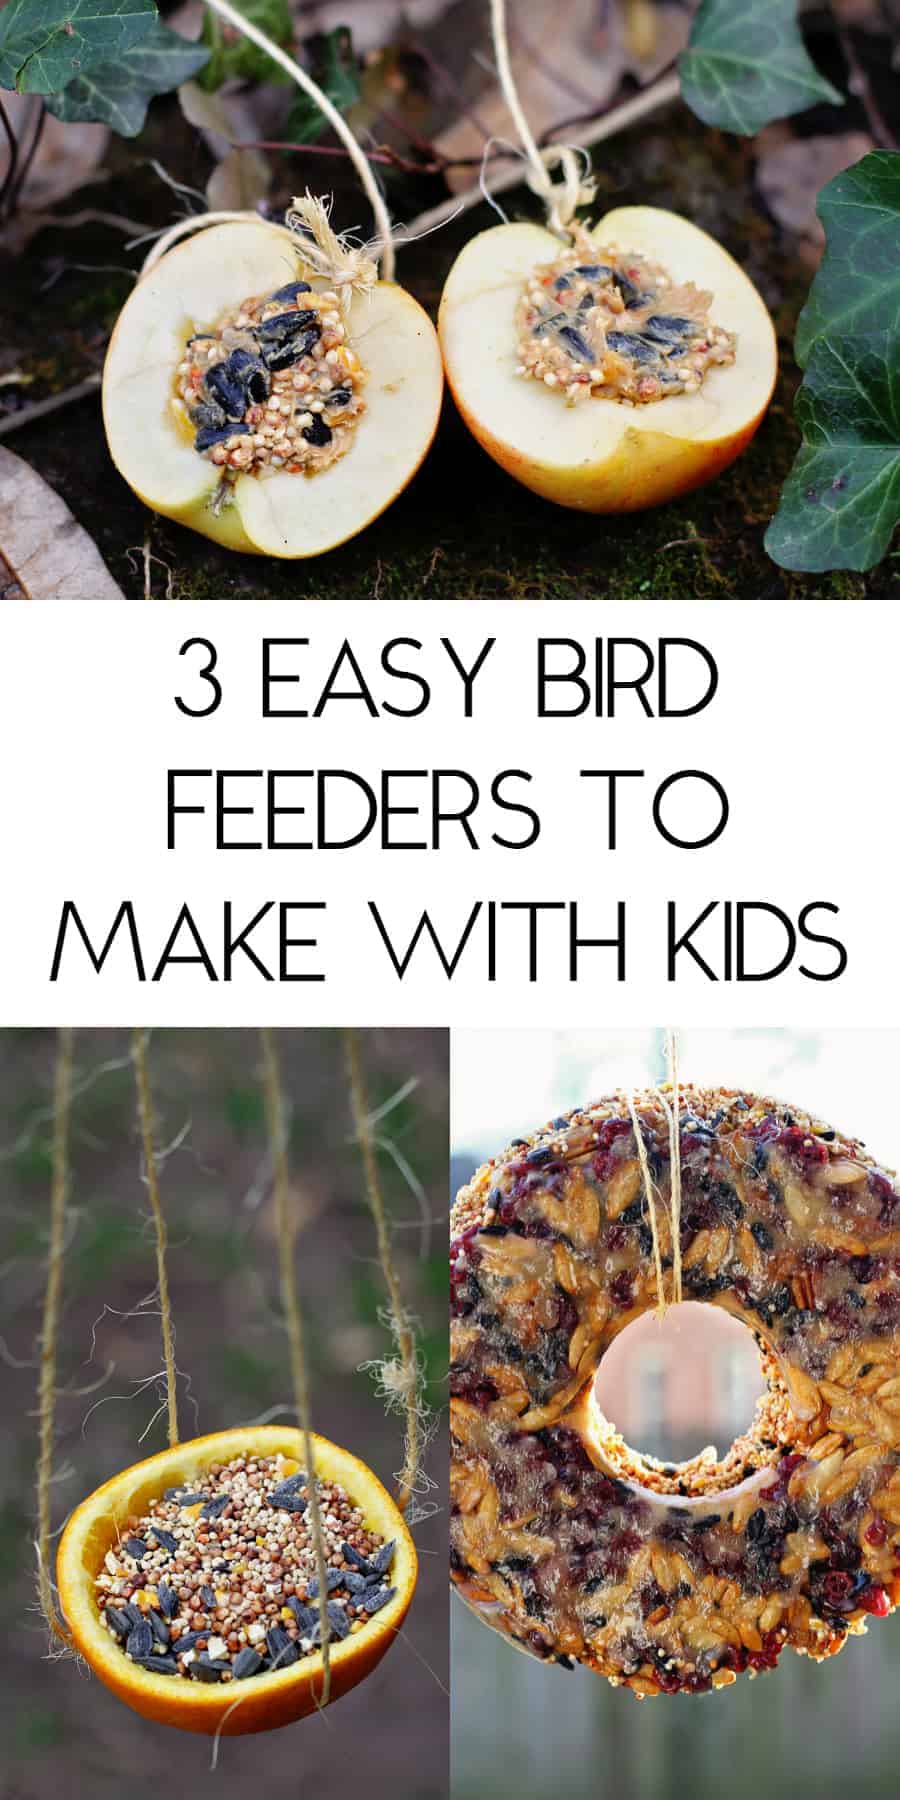 3 easy bird feeders to make with kids